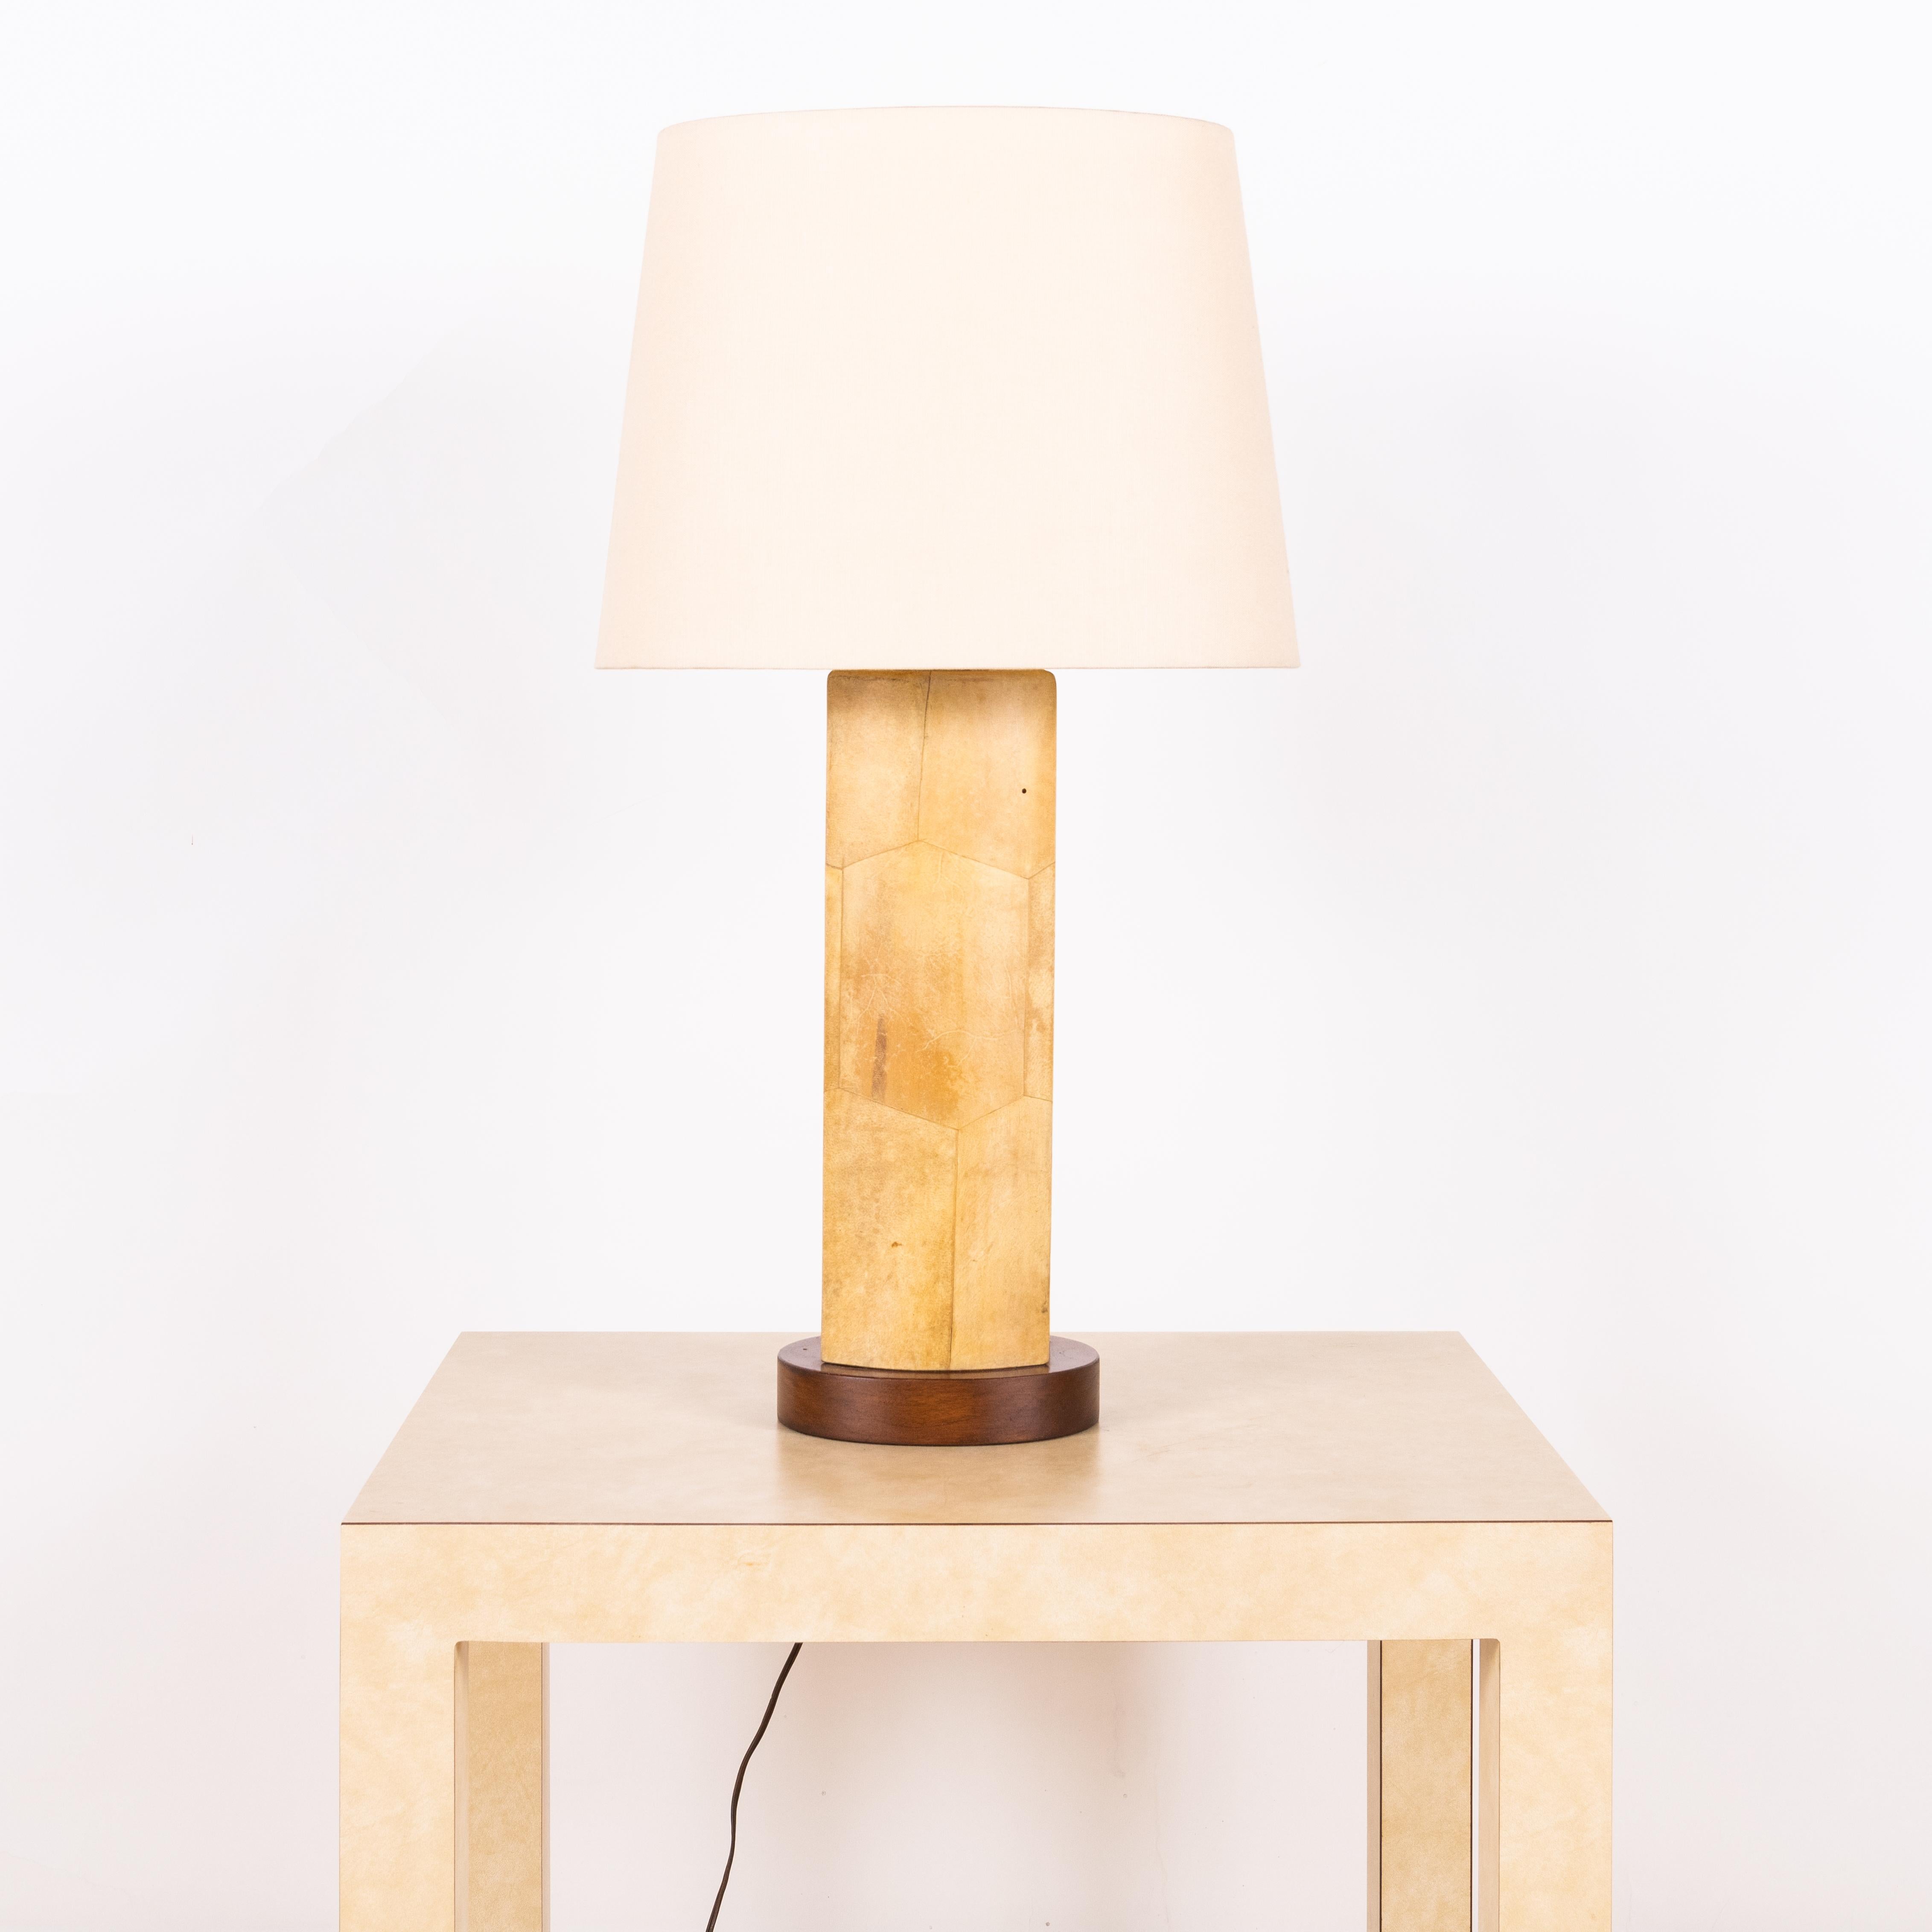 Tall goatskin lamp with custom oval linen shade by Alto Tura.

Stamped: 